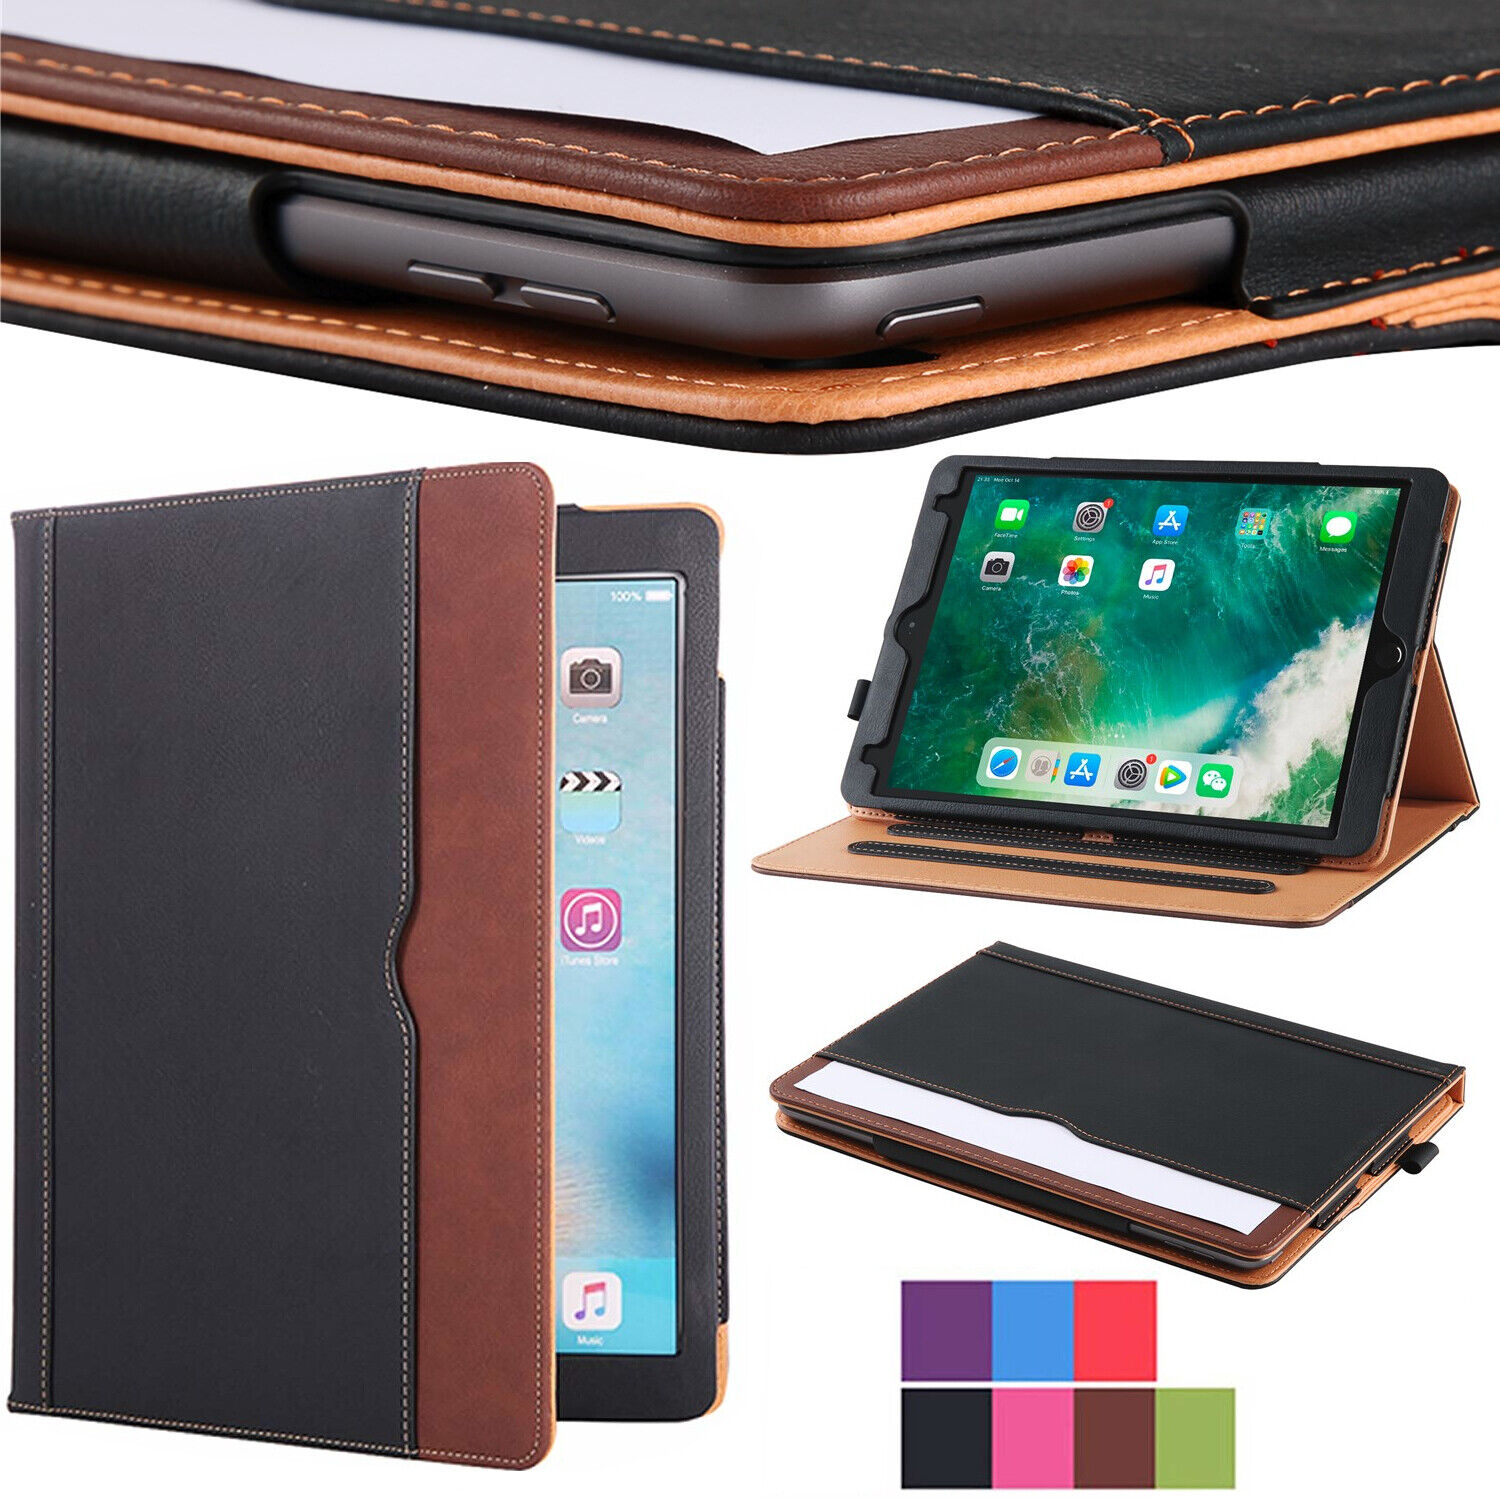 iPad 10.2 Case 8th Generation 2020 Soft Leather Smart Cover Sleep Wake For Apple